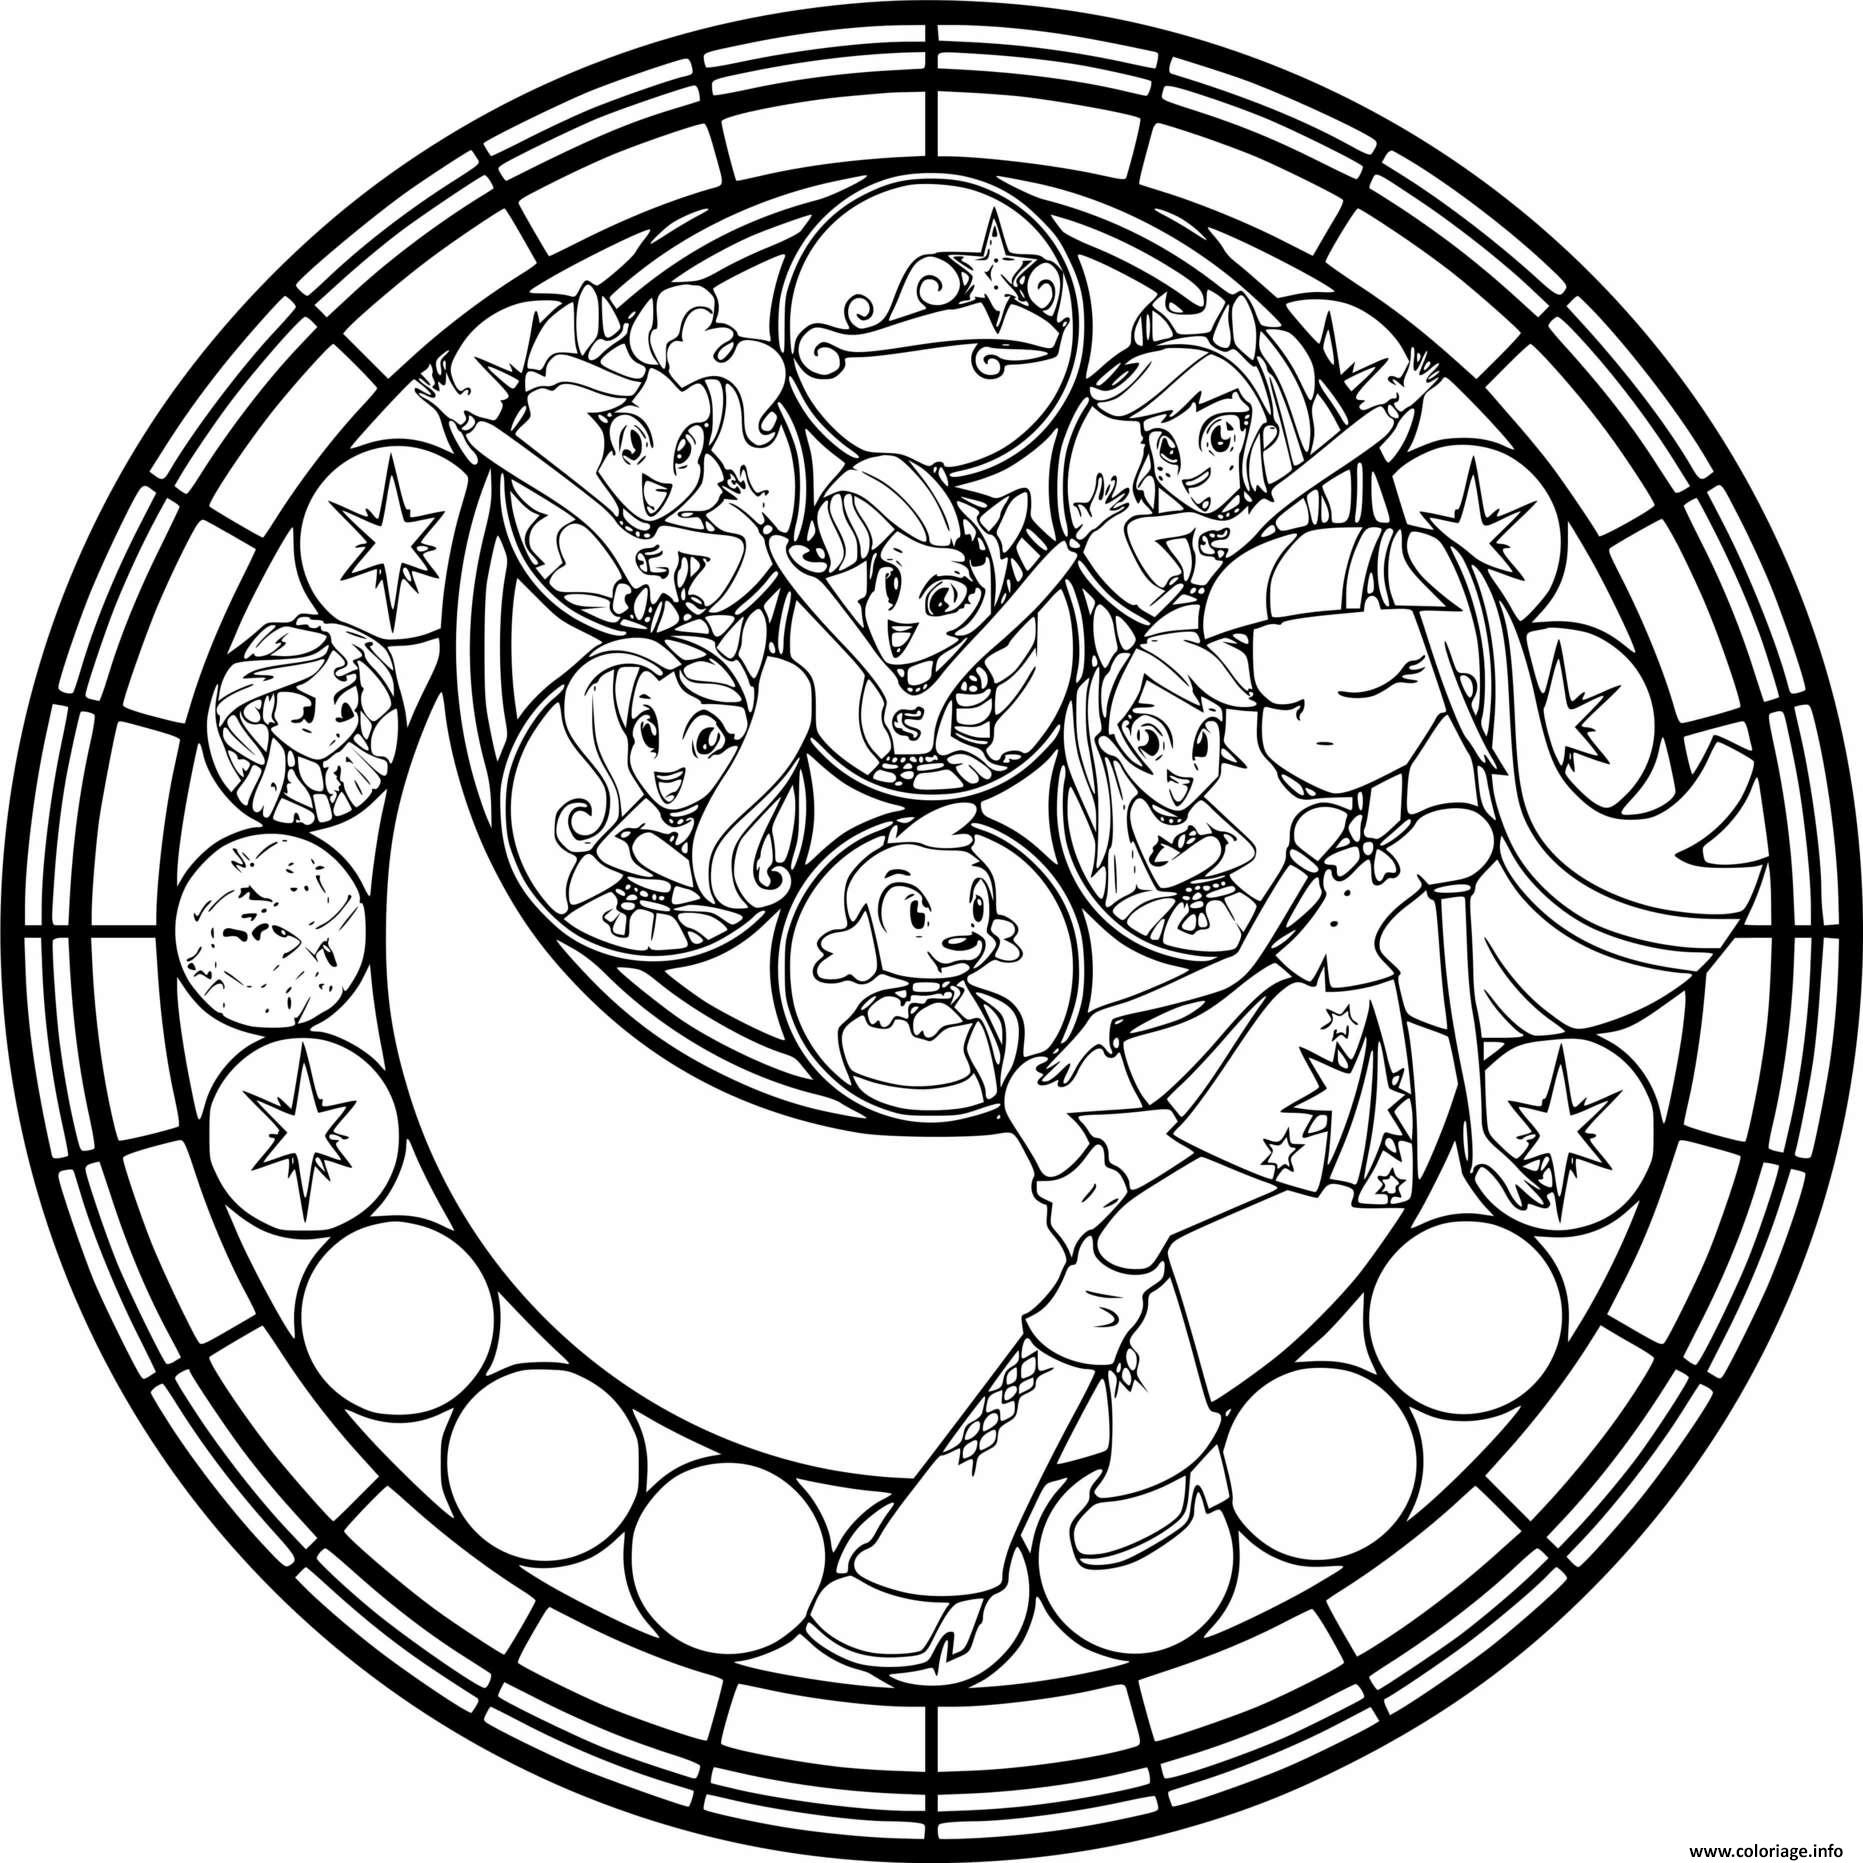 Coloriage My Little Pony Equestria Girls Stained Glass Dessin à Imprimer